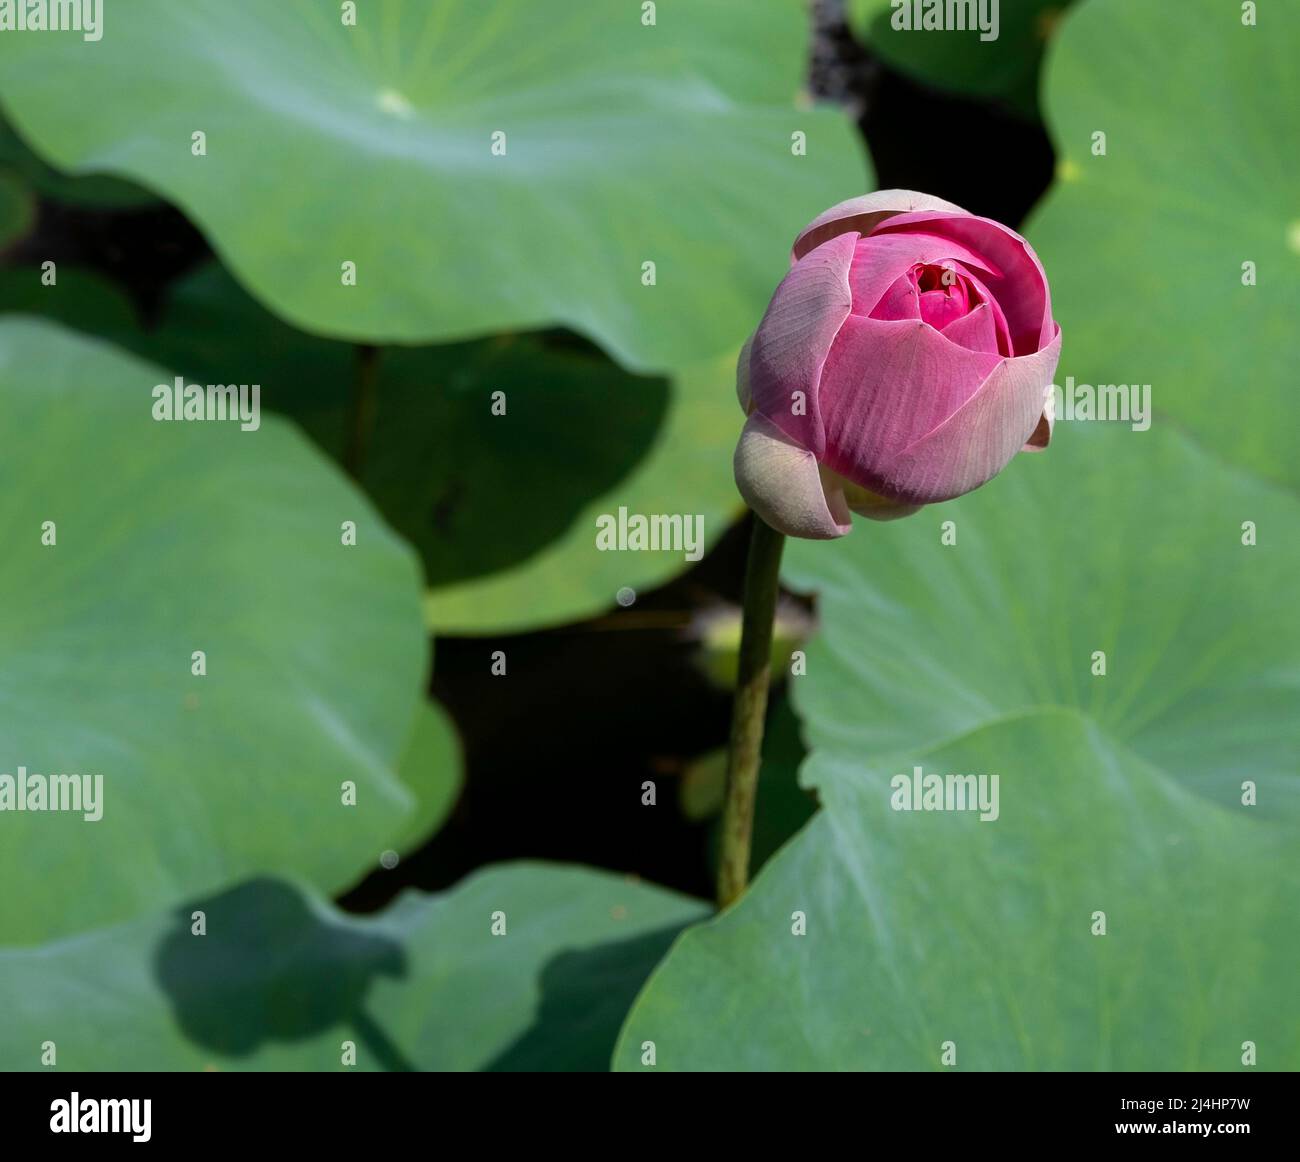 Close up top view of a pink lotus flower bud surrounded by green lily pads in pond Stock Photo